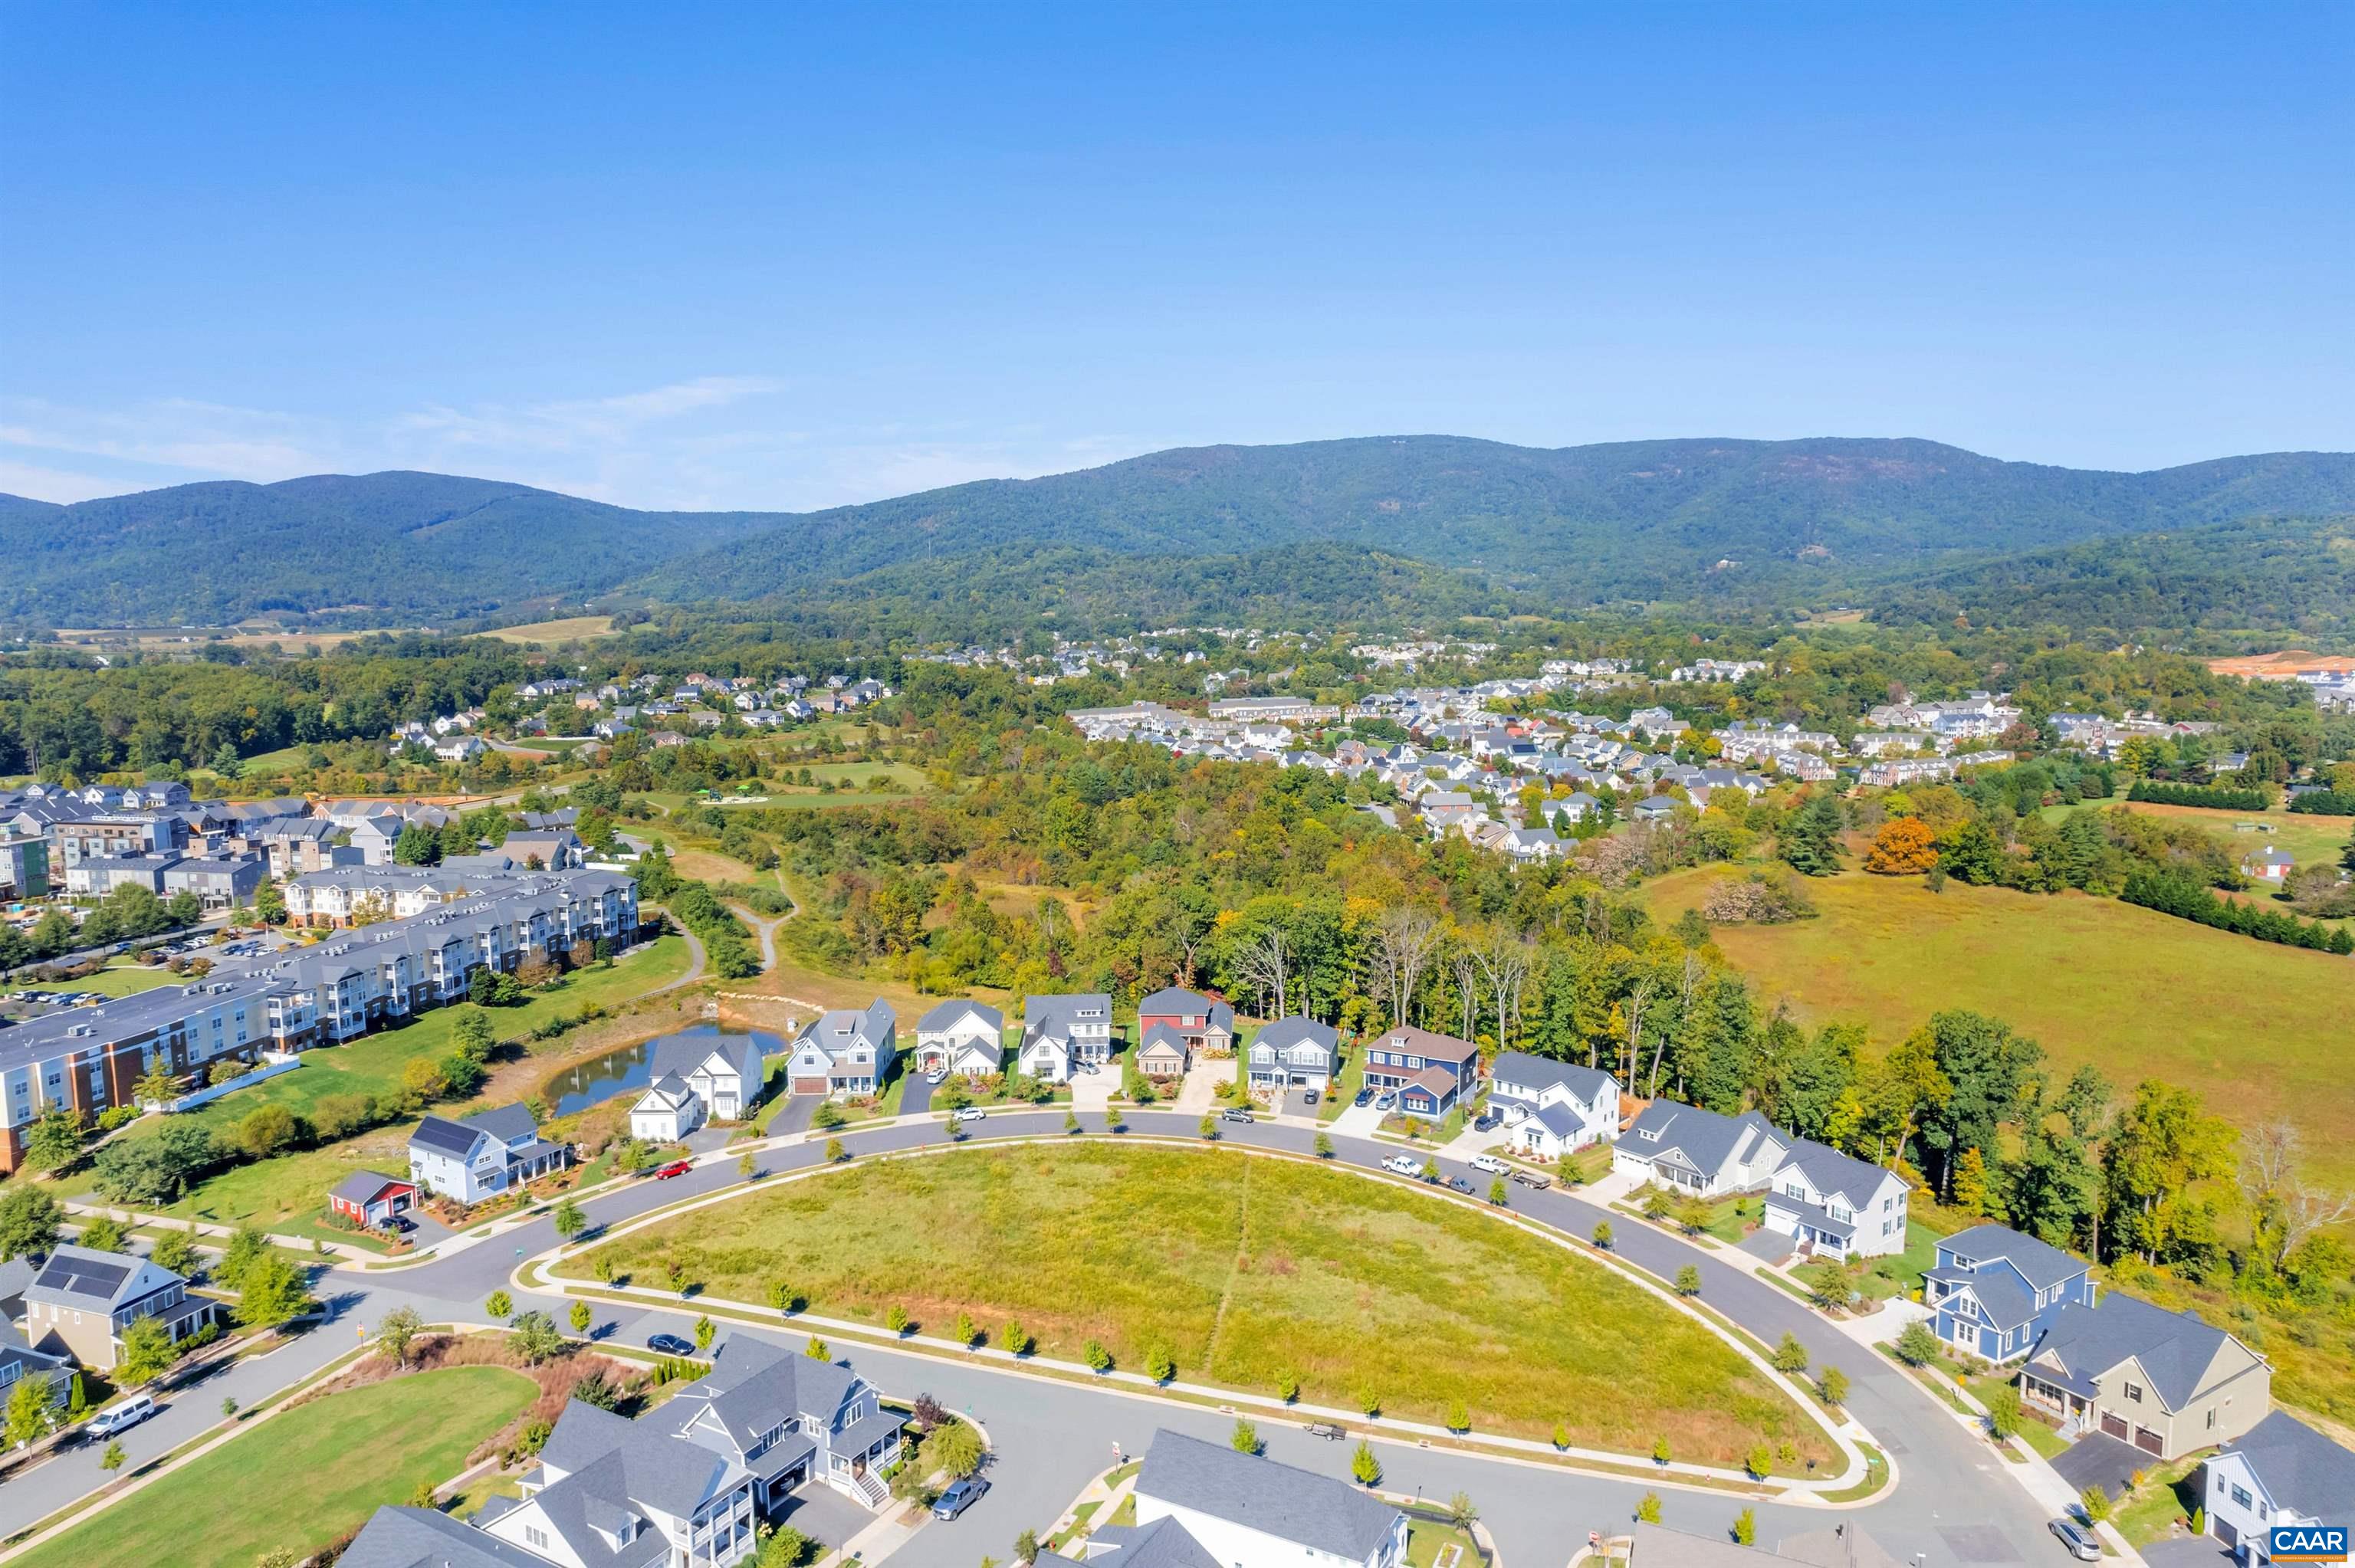 Luxury Elevator Townhome with Mountain Views! This End Unit Towne comes with 4 Finished Floors, Residential Elevator servicing all 4 Floors, Rooftop Veranda and potential rental income with 1st Floor Bedroom/Bath dependency/ADU. This wide townhome is designed to capture the beautiful Crozet views while incorporating thoughtful, included features and spacious living spaces throughout. Starting with a 2-Car Garage, finished bedroom and full bath dependency/ADU on the lower level, you can head to the open 2nd Level for entertaining in your Kitchen, Great Room, Dining Room & spacious Trex Deck (plus a half bath!). The 3rd Level is home to the private Owner's Suite & Bath, second bedroom and full bath. The 4th Level comes with a finished Rec Room, full bath & show-stopping Veranda. Located in amenity-filled Old Trail, you can enjoy all that this neighborhood & Crozet have to offer! You'll get to work alongside our talented Design Coordinator to hand pick all the selections, truly making this home your own. Start planning for your Fall 2024 move-in now! End unit. Elevator and Veranda Included.